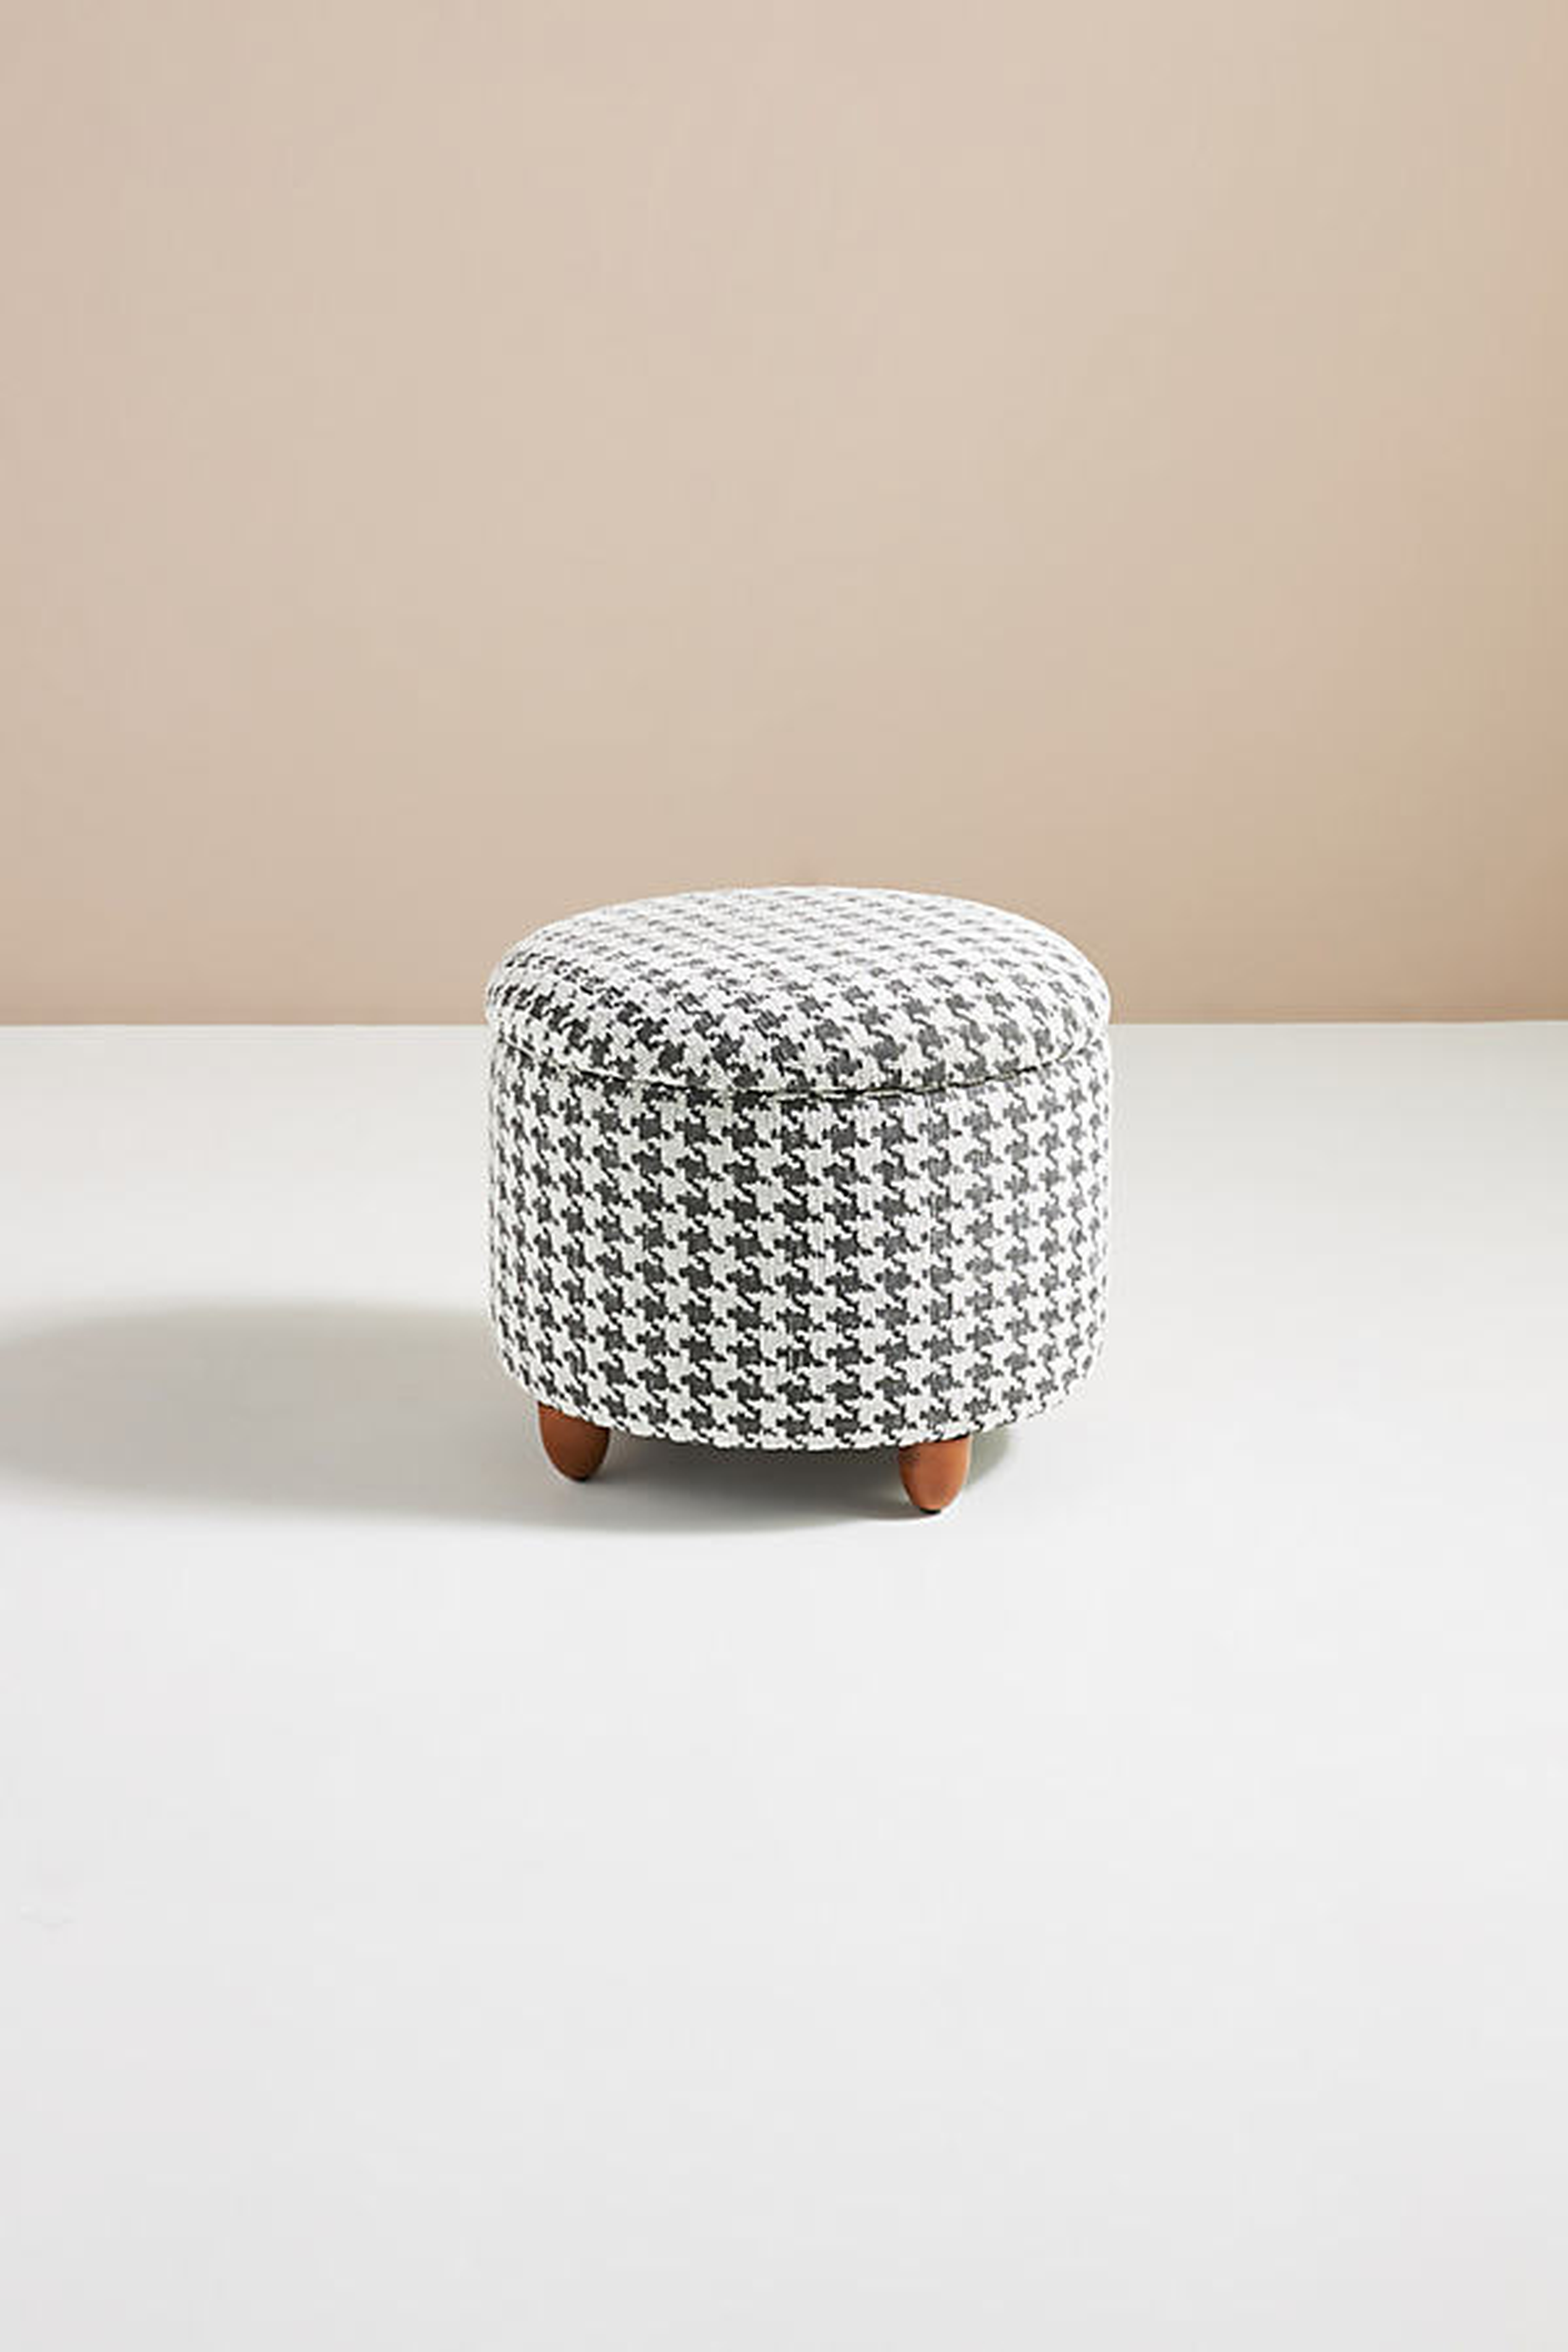 Houndstooth Louise Storage Ottoman By Anthropologie in Black - Anthropologie